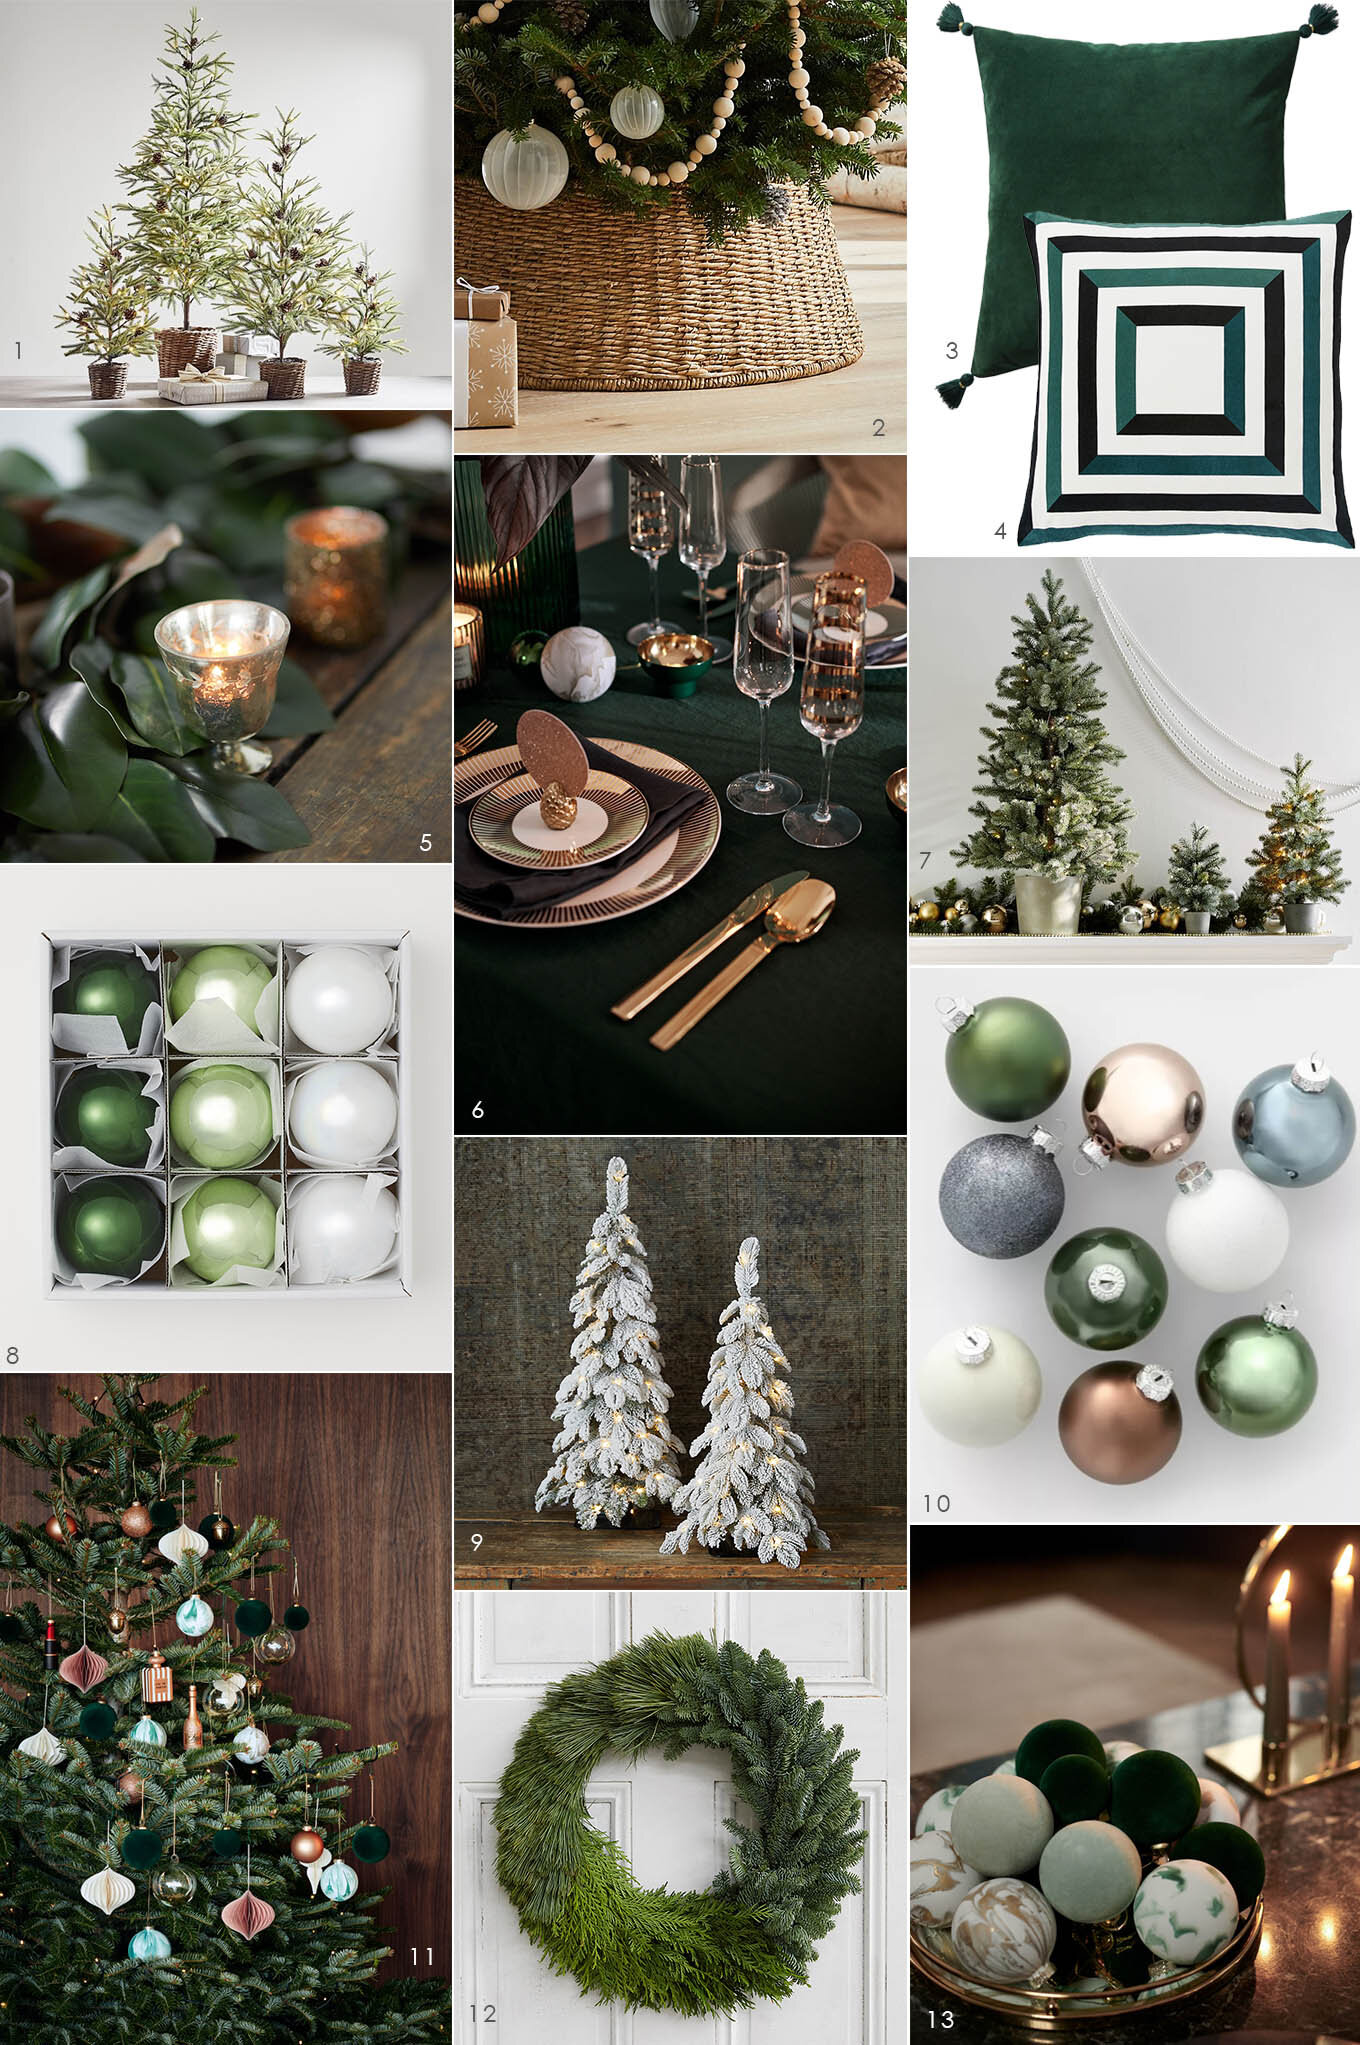 We are decorating for Christmas with green and gold. With pre-lit trees, lots of green glass ornaments, gold reindeer and velvet cushions.